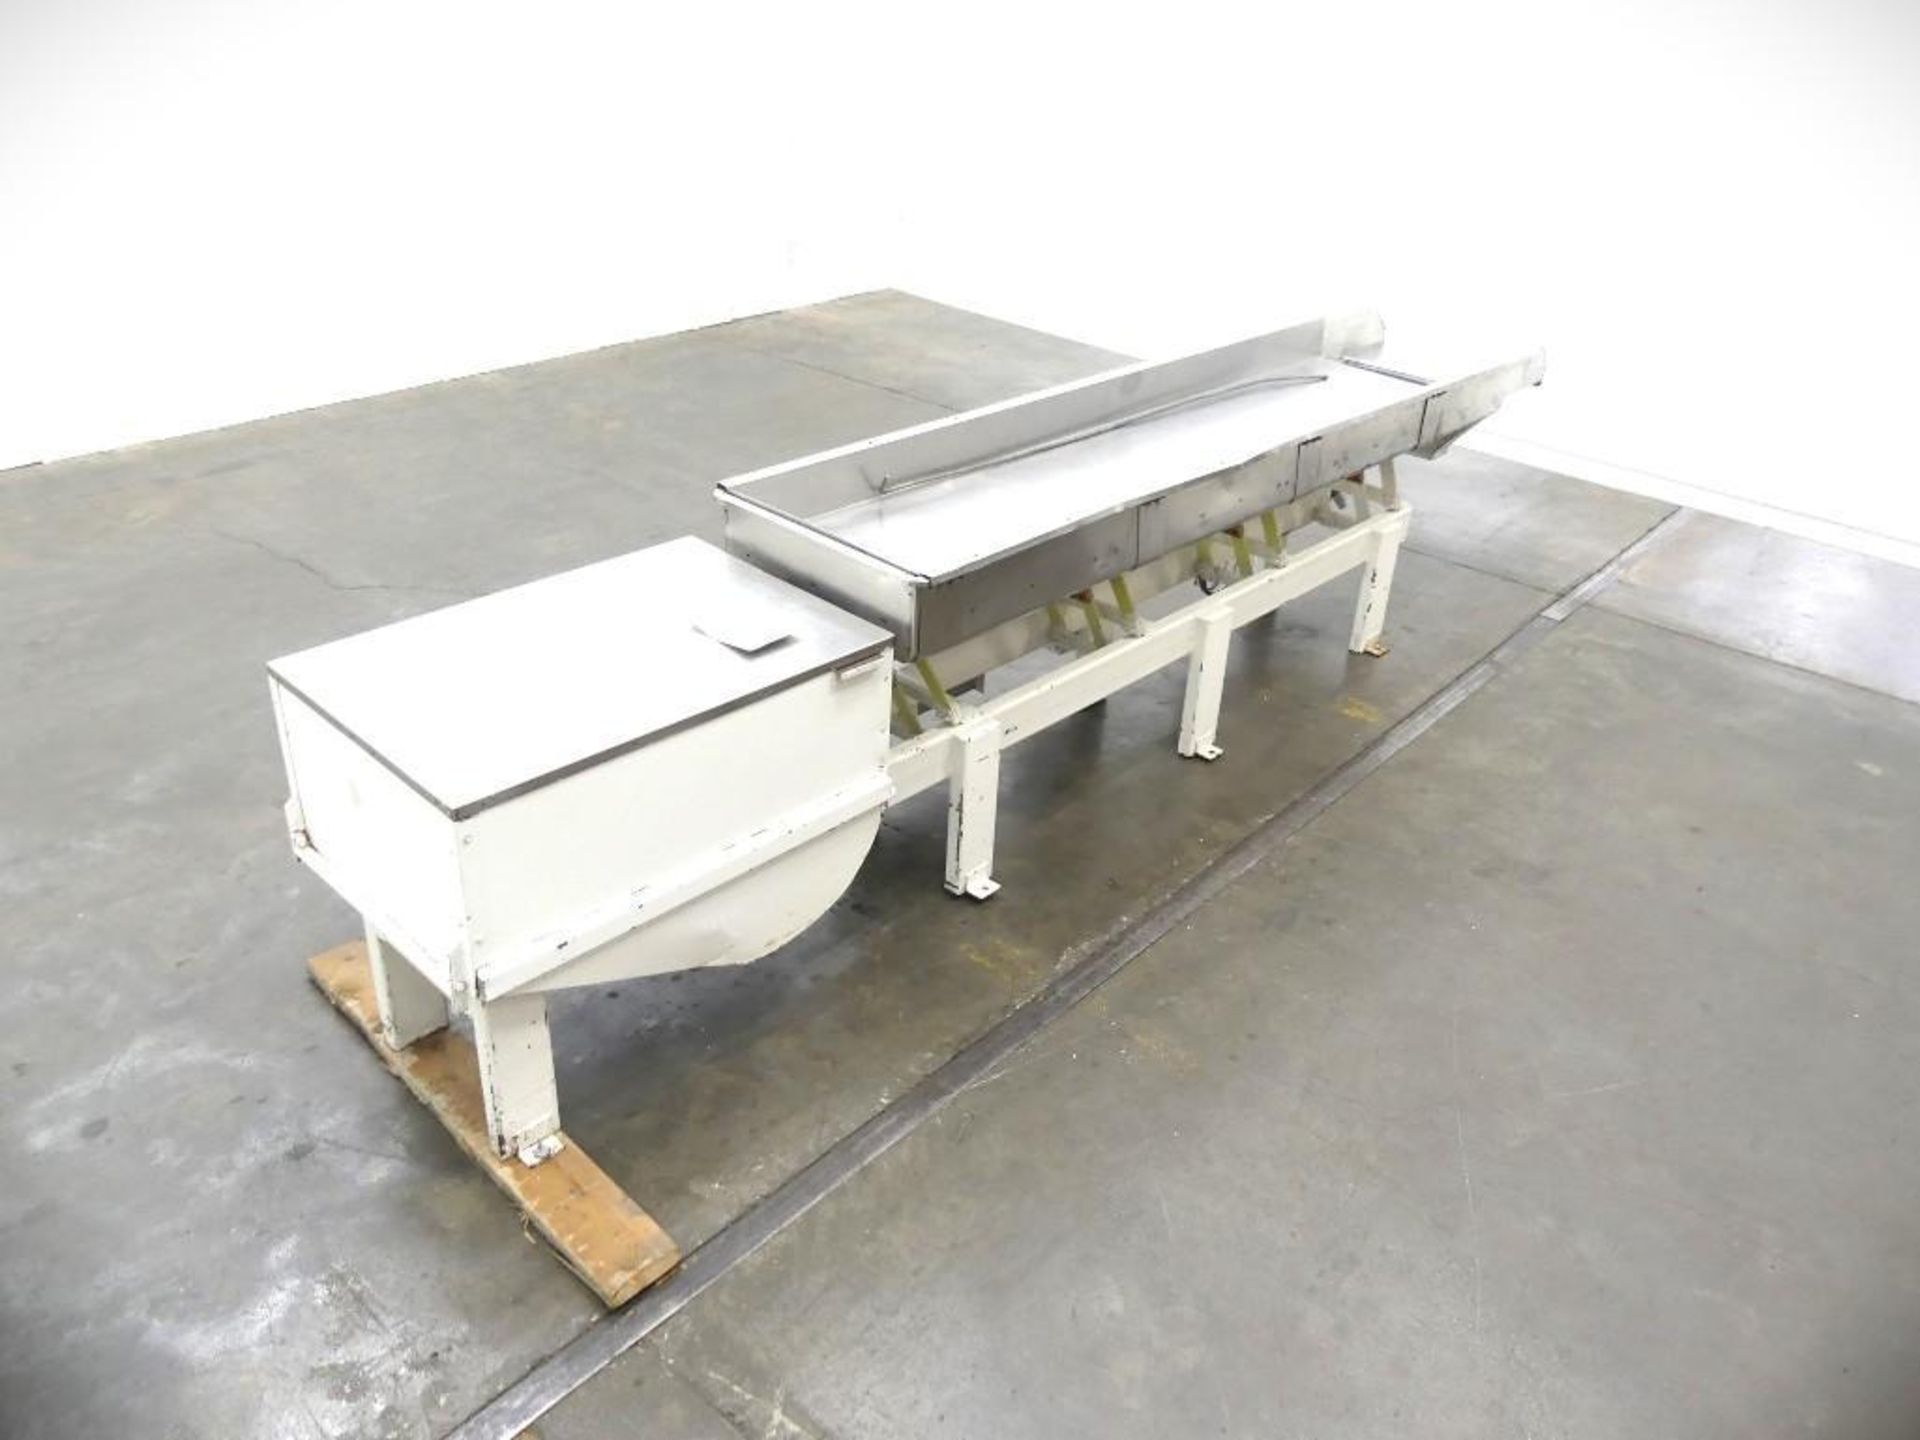 8'L x 24"W Linear Vibratory Feeder - Image 2 of 23